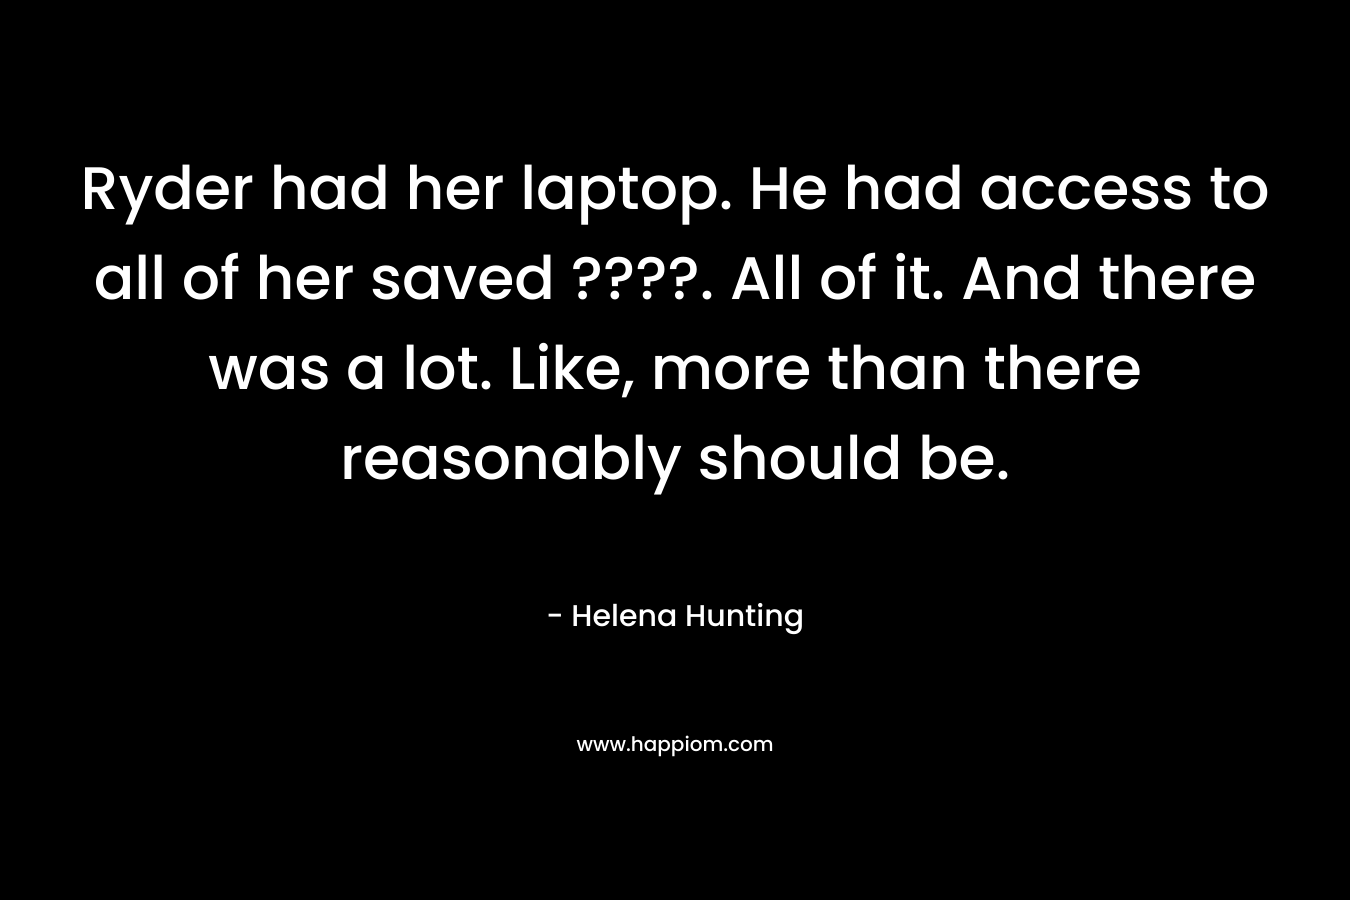 Ryder had her laptop. He had access to all of her saved ????. All of it. And there was a lot. Like, more than there reasonably should be. – Helena Hunting